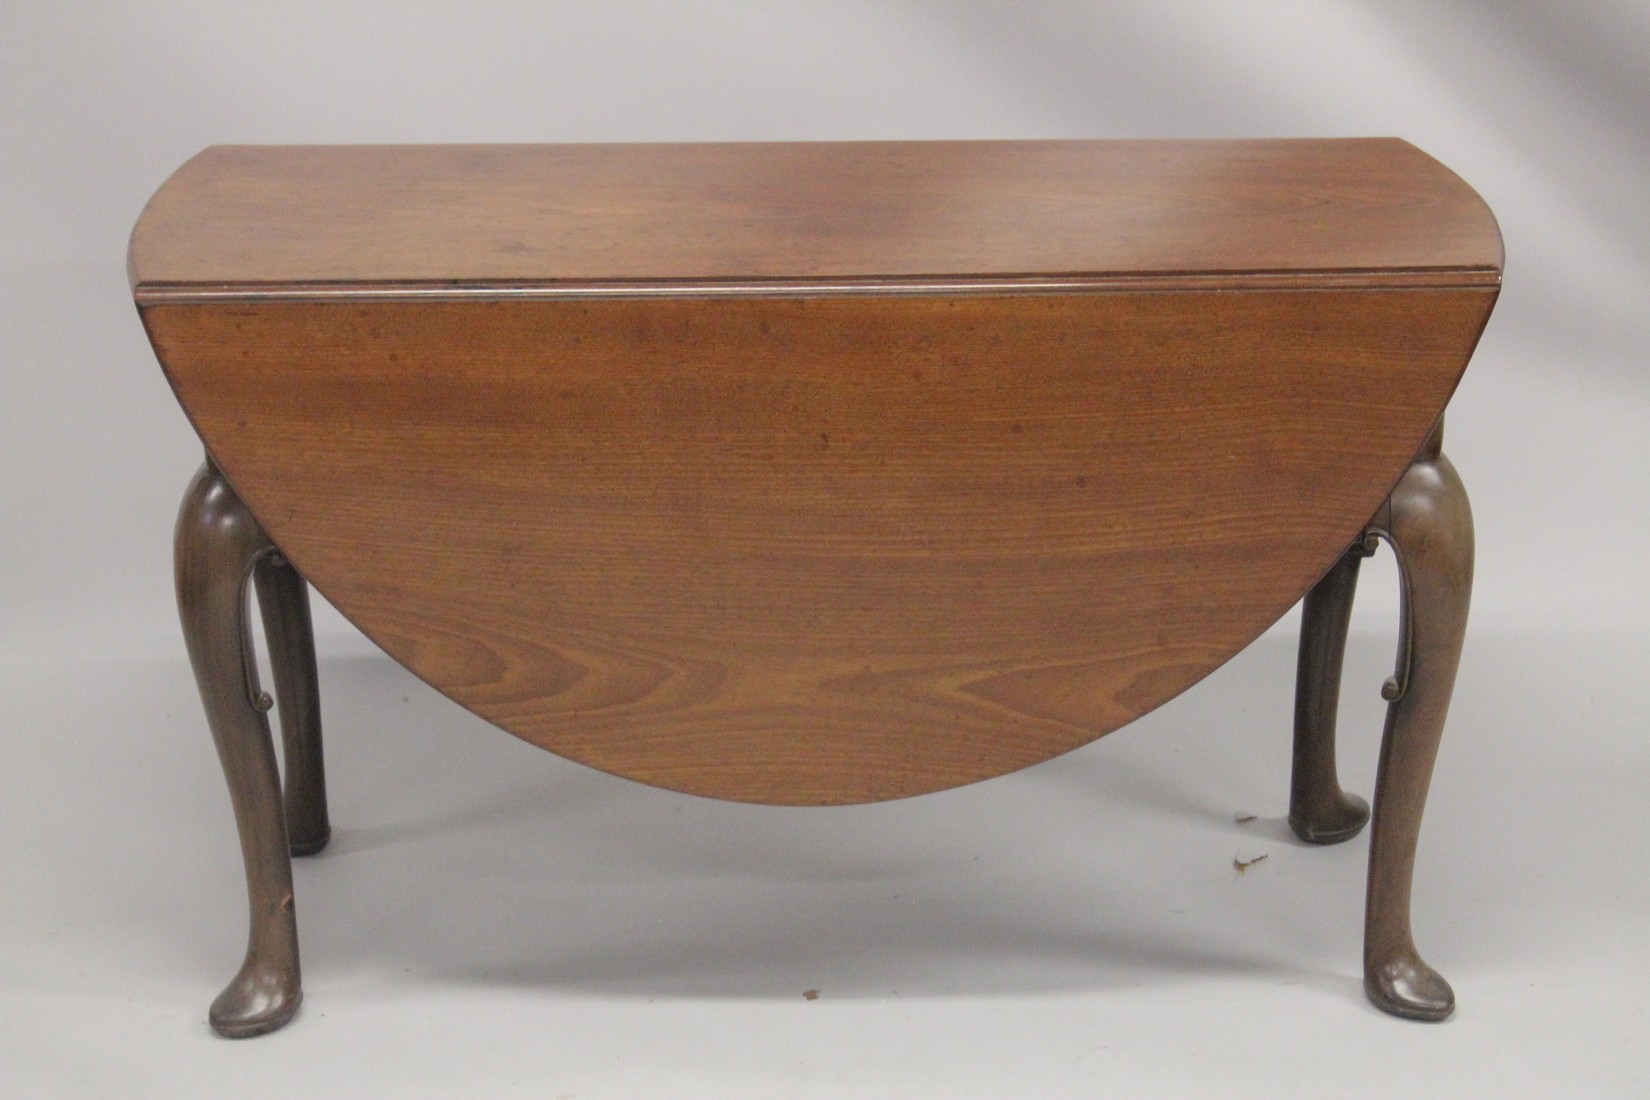 A GOOD GEORGE III MAHOGANY OVAL DROP FLAP DINING TABLE with gate leg action, on cabriole legs ending